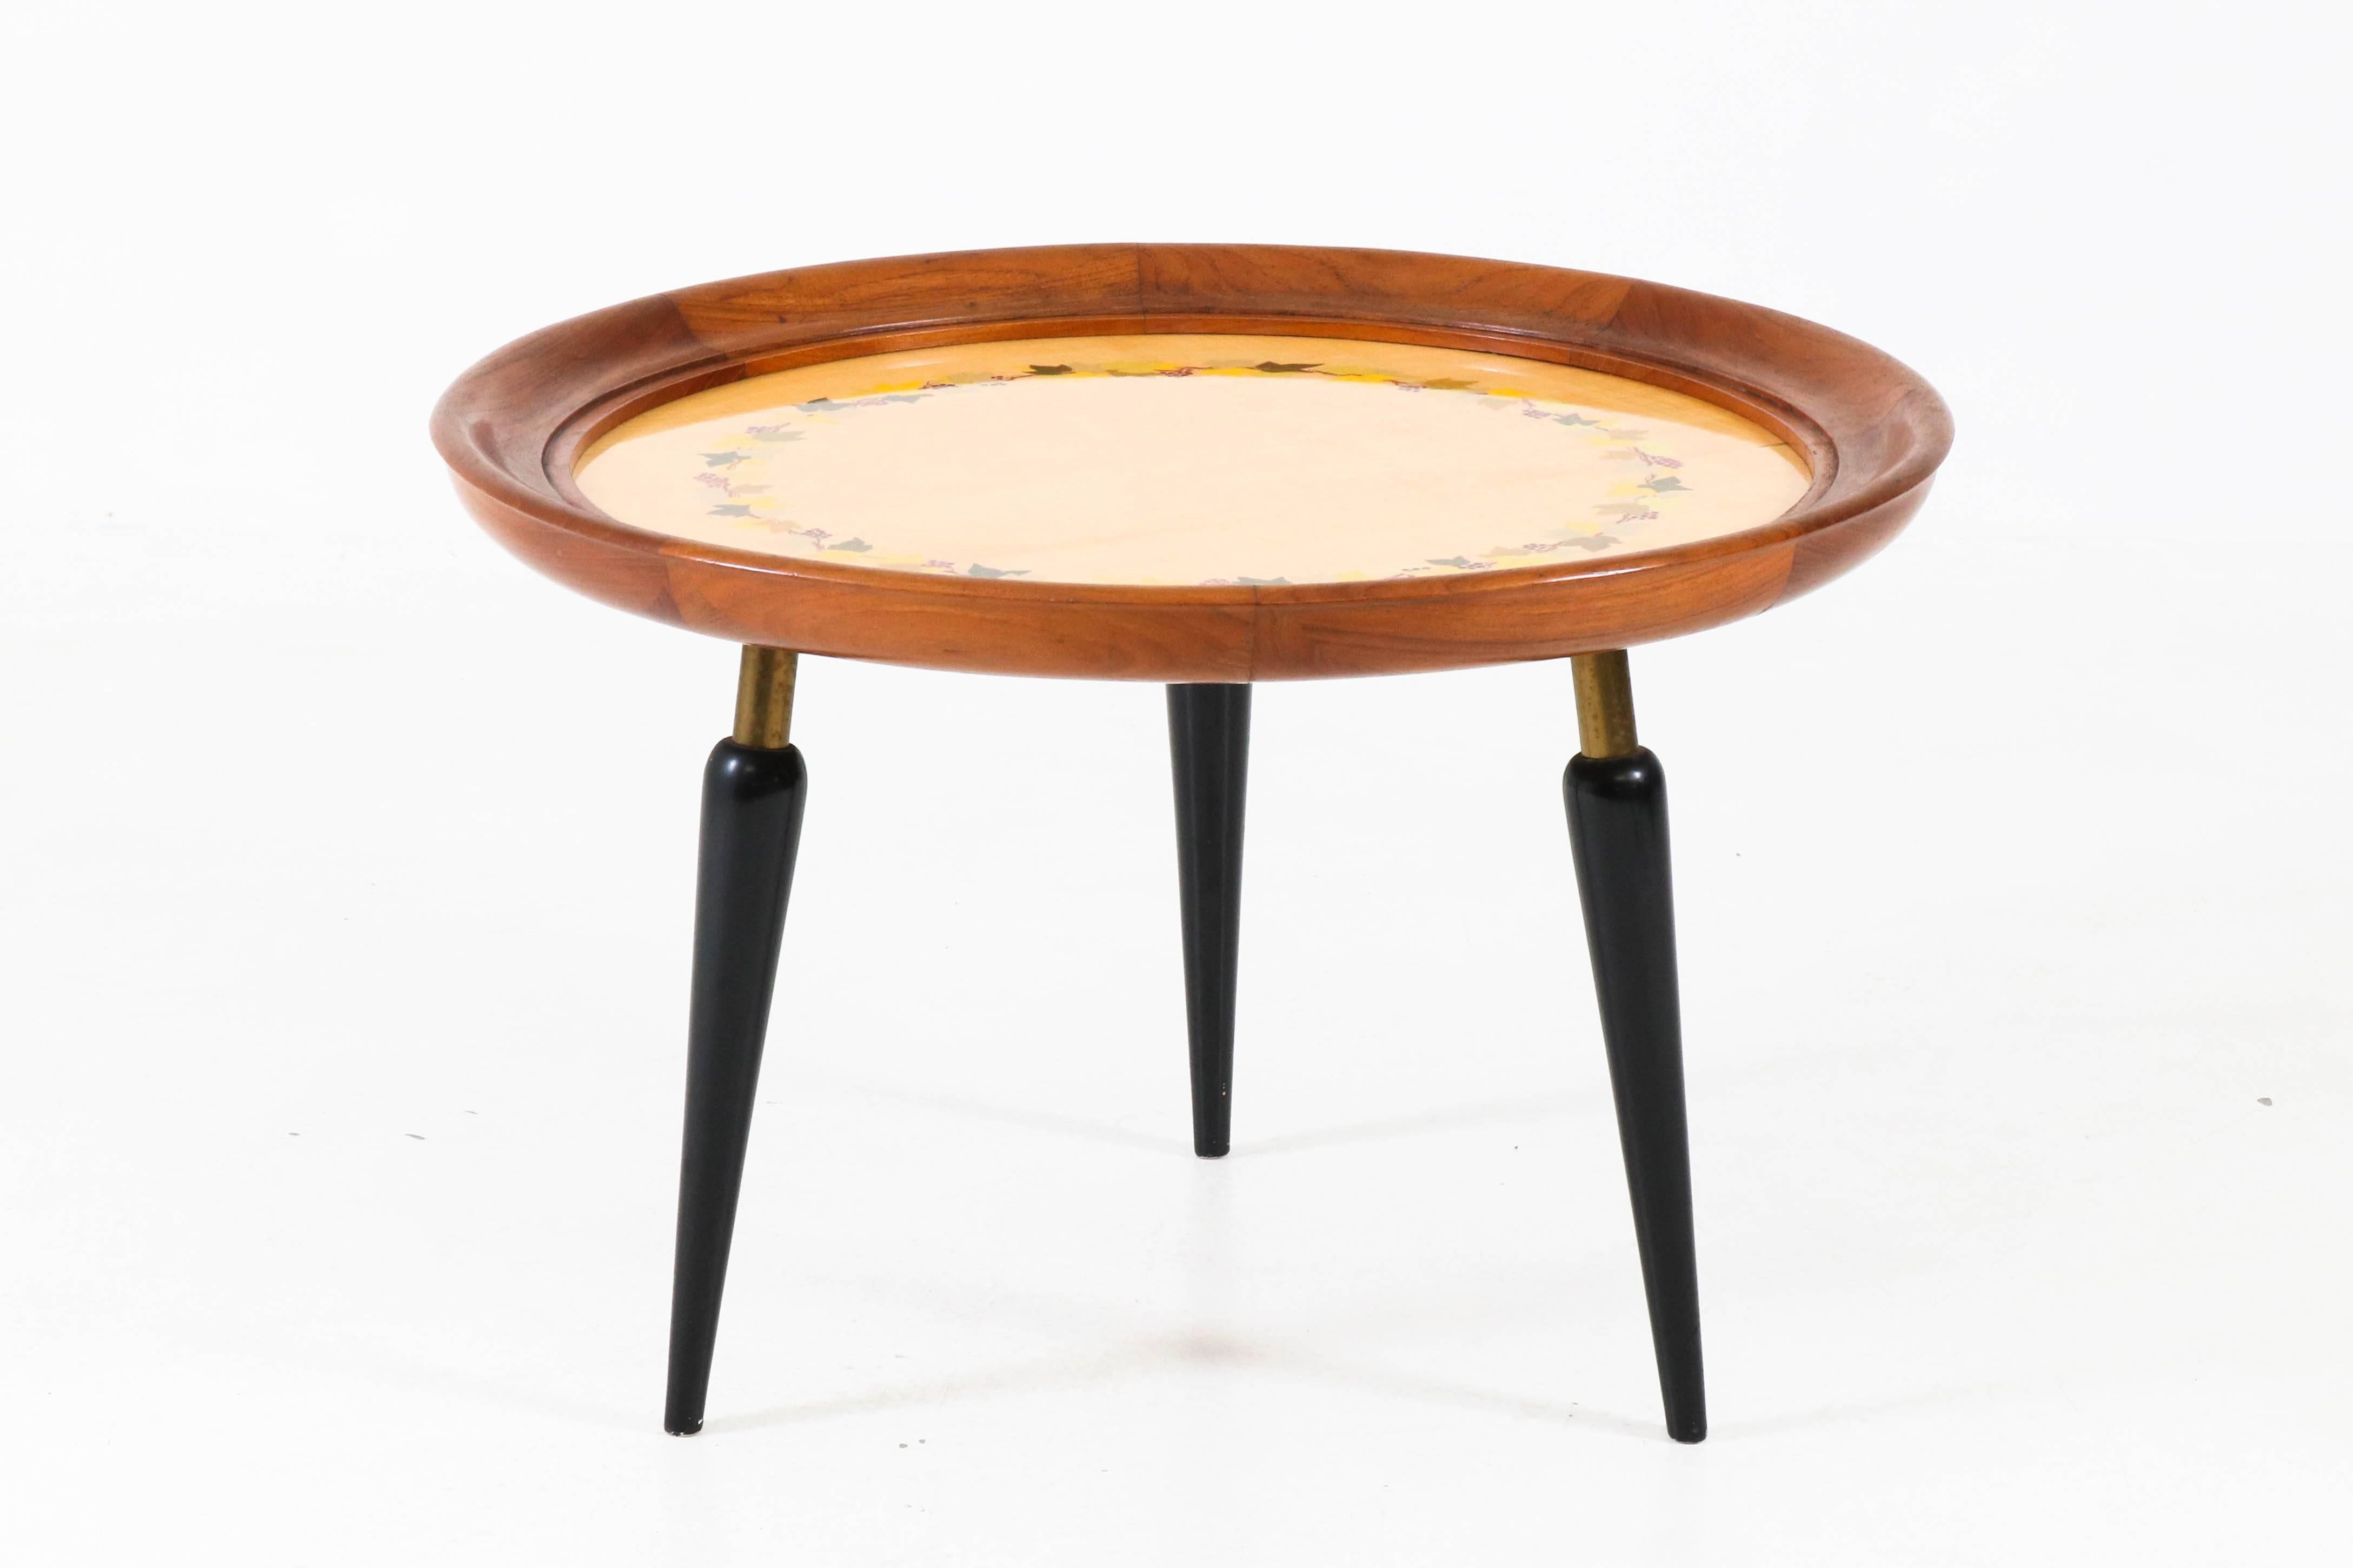 Italian Mid-Century Modern Fruitwood Coffee Table with Inlay, 1950s For Sale 3